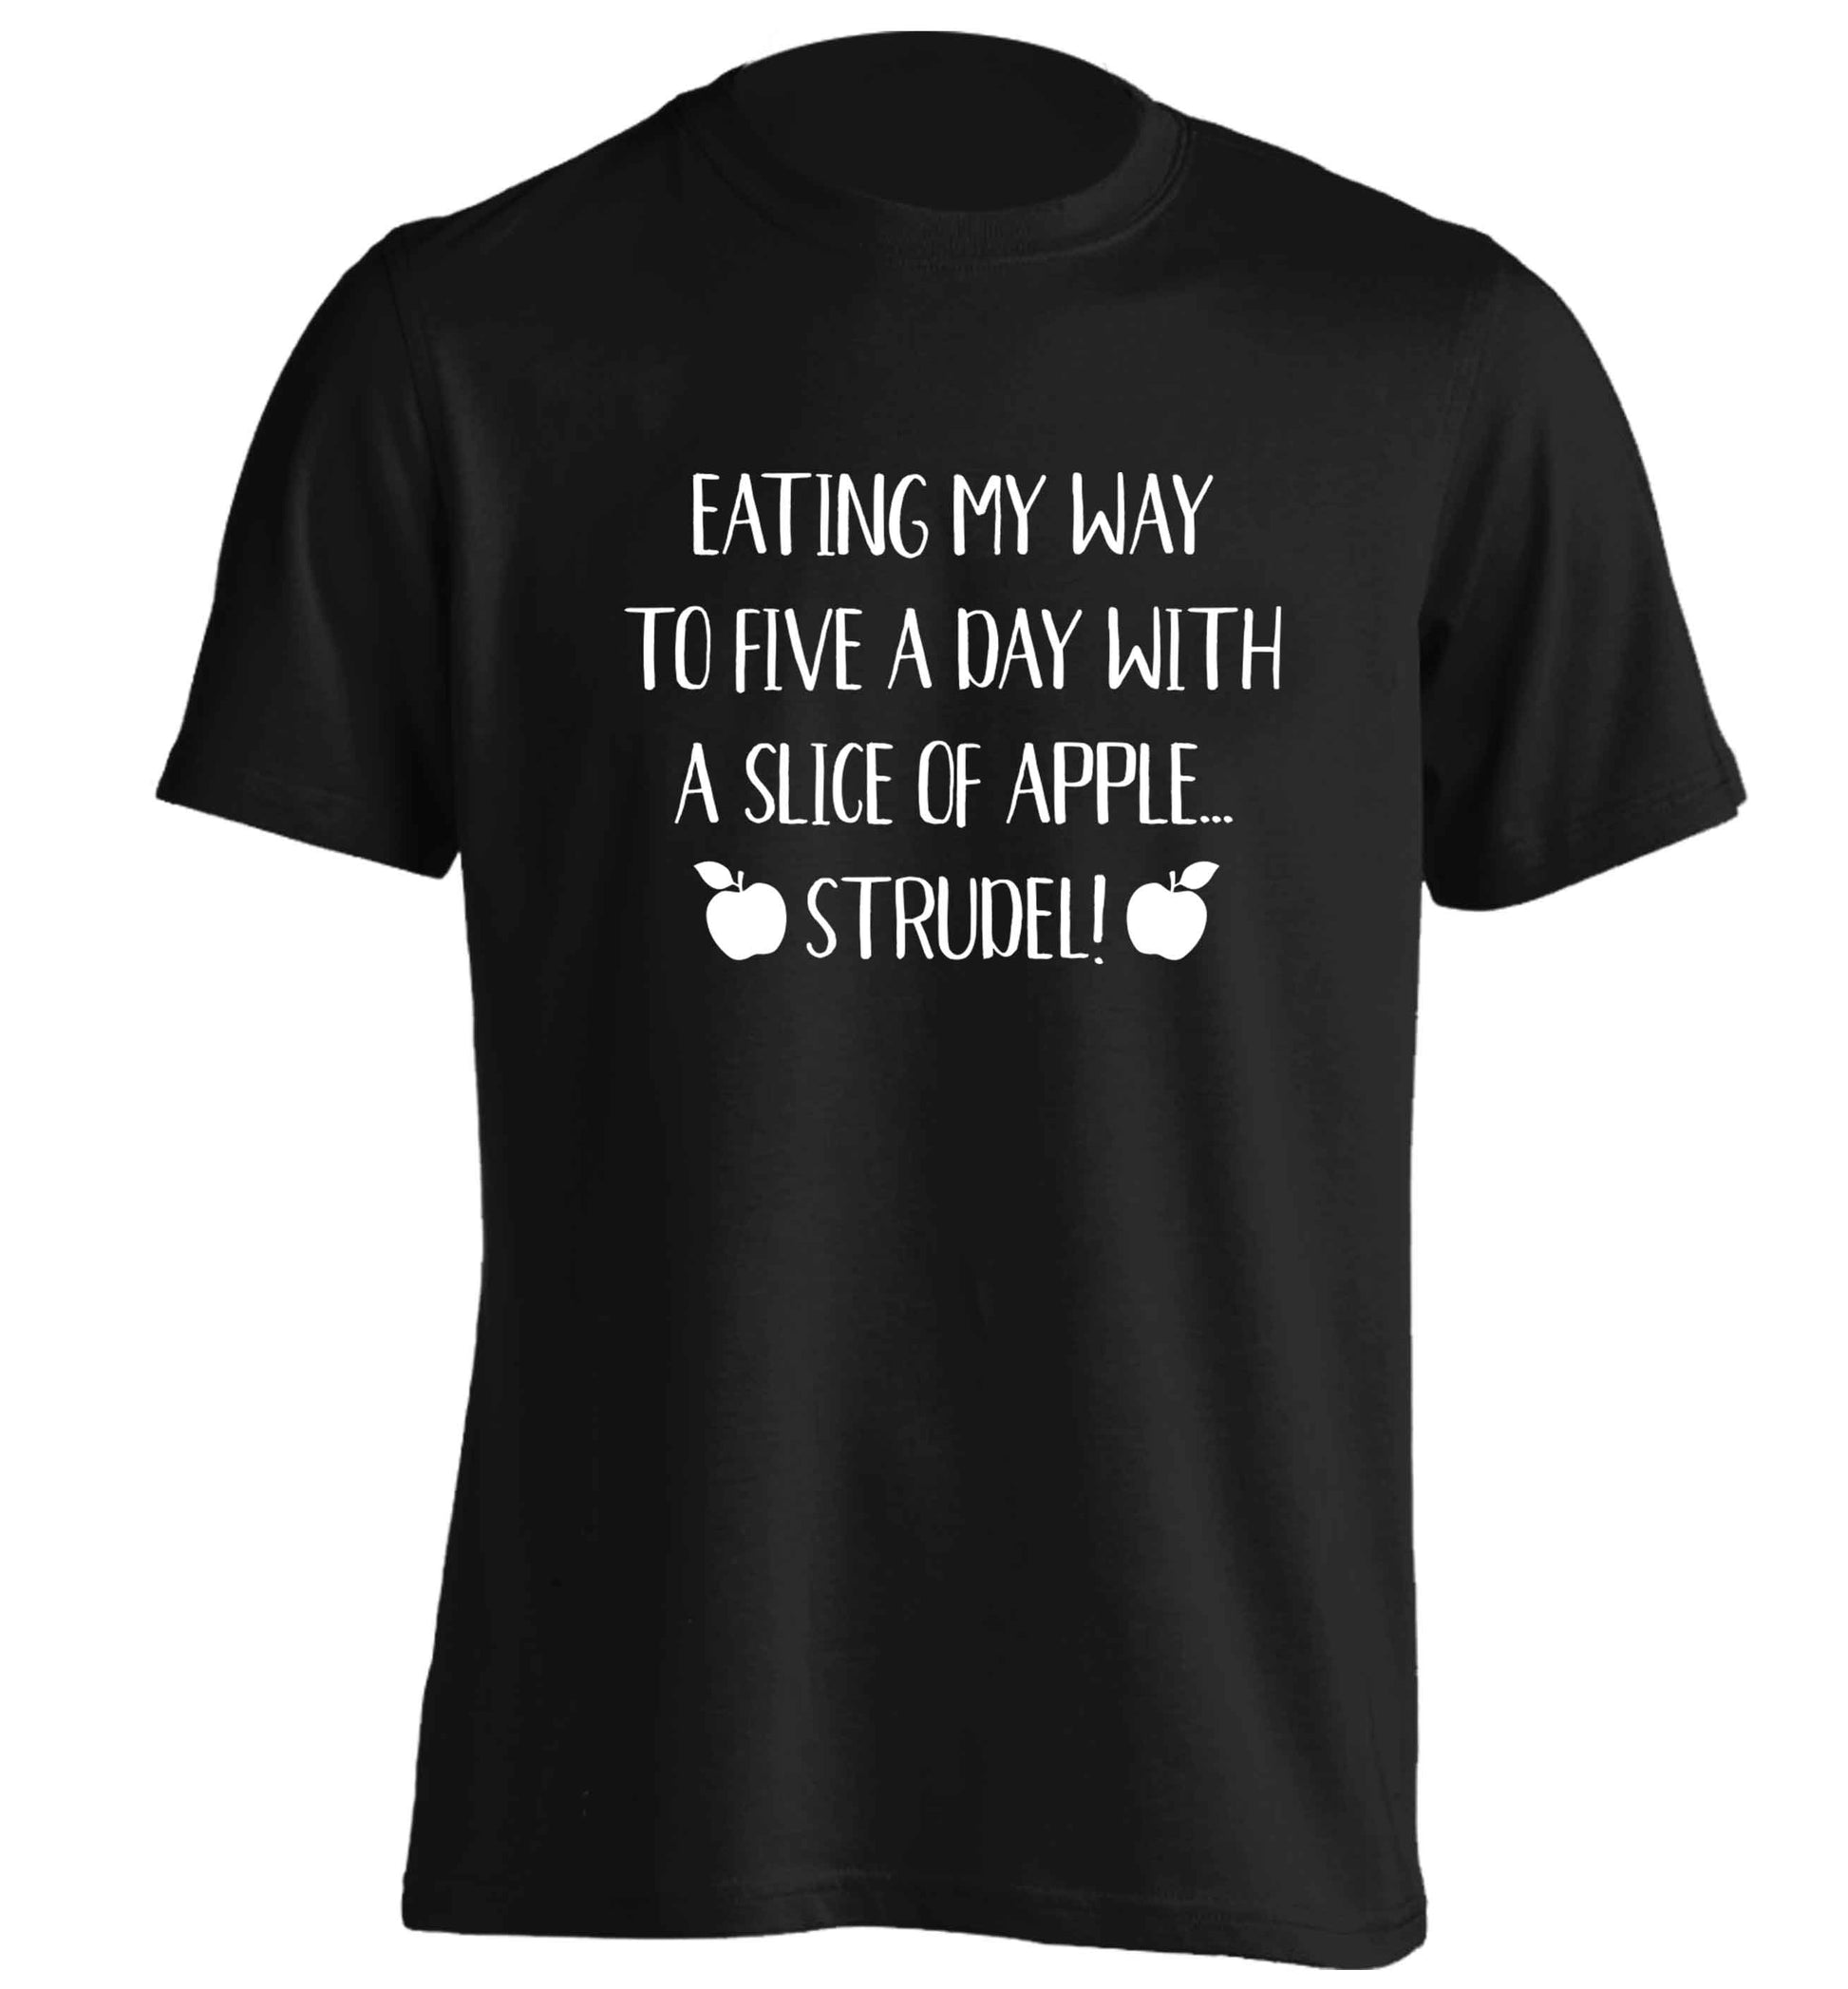 Eating my way to five a day with a slice of apple strudel adults unisex black Tshirt 2XL